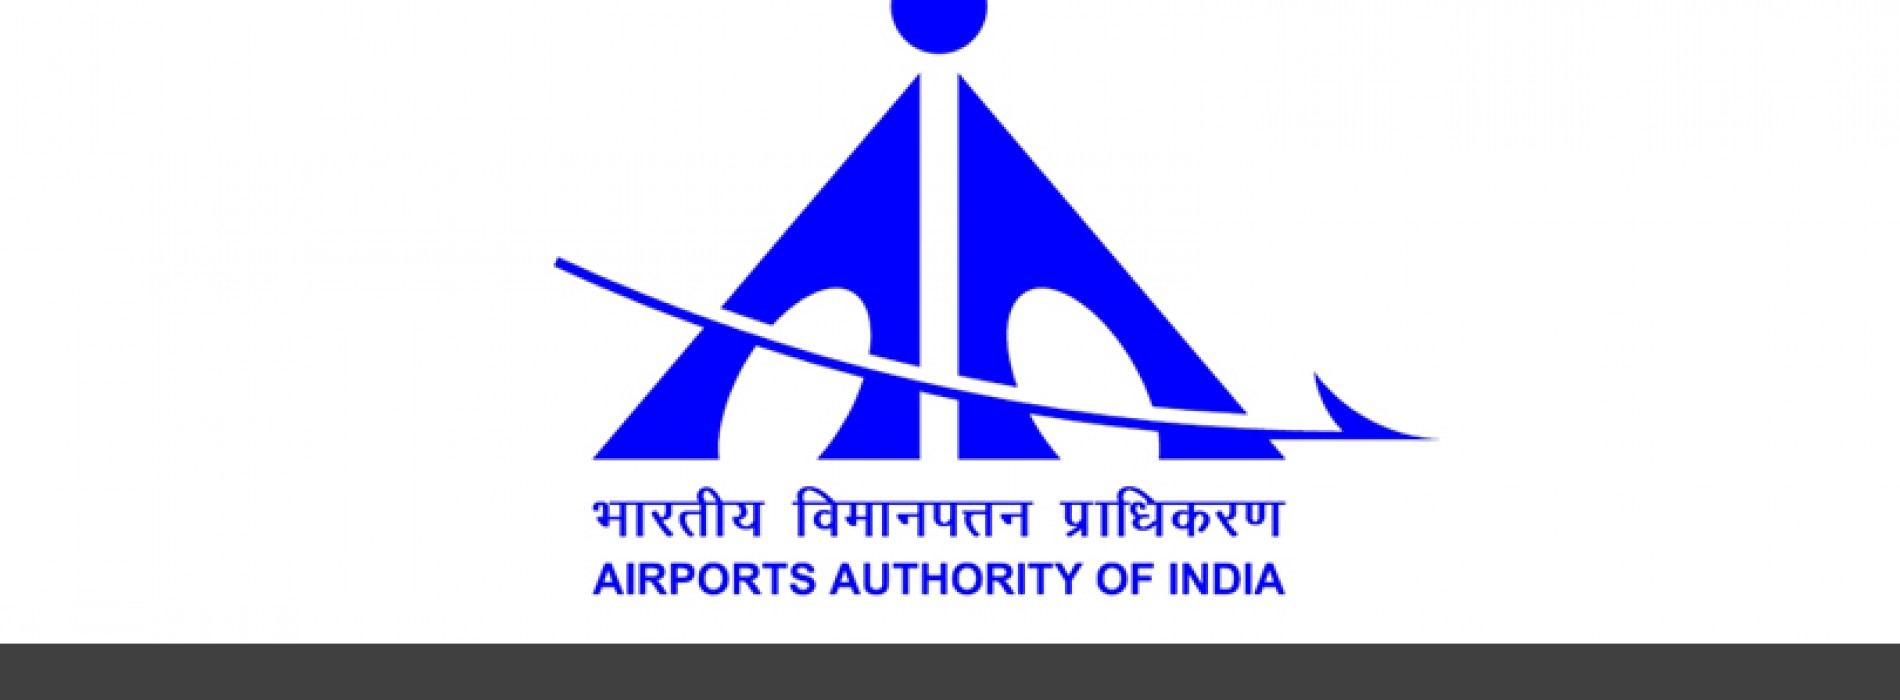 Airport Authority of India to introduce new international airport in Odisha